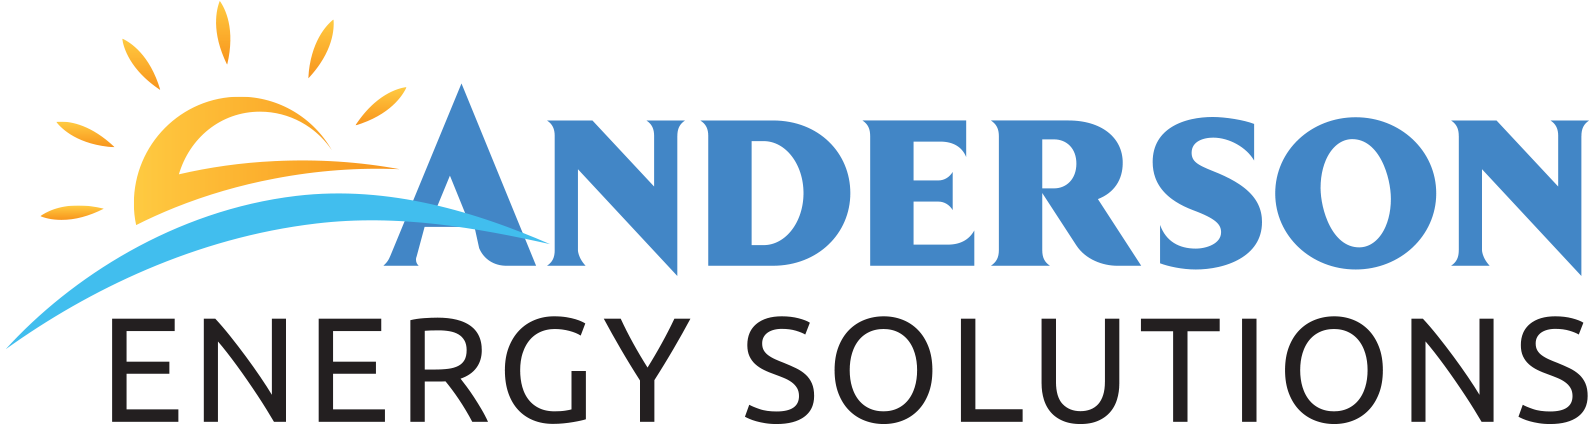 Anderson Energy Solutions